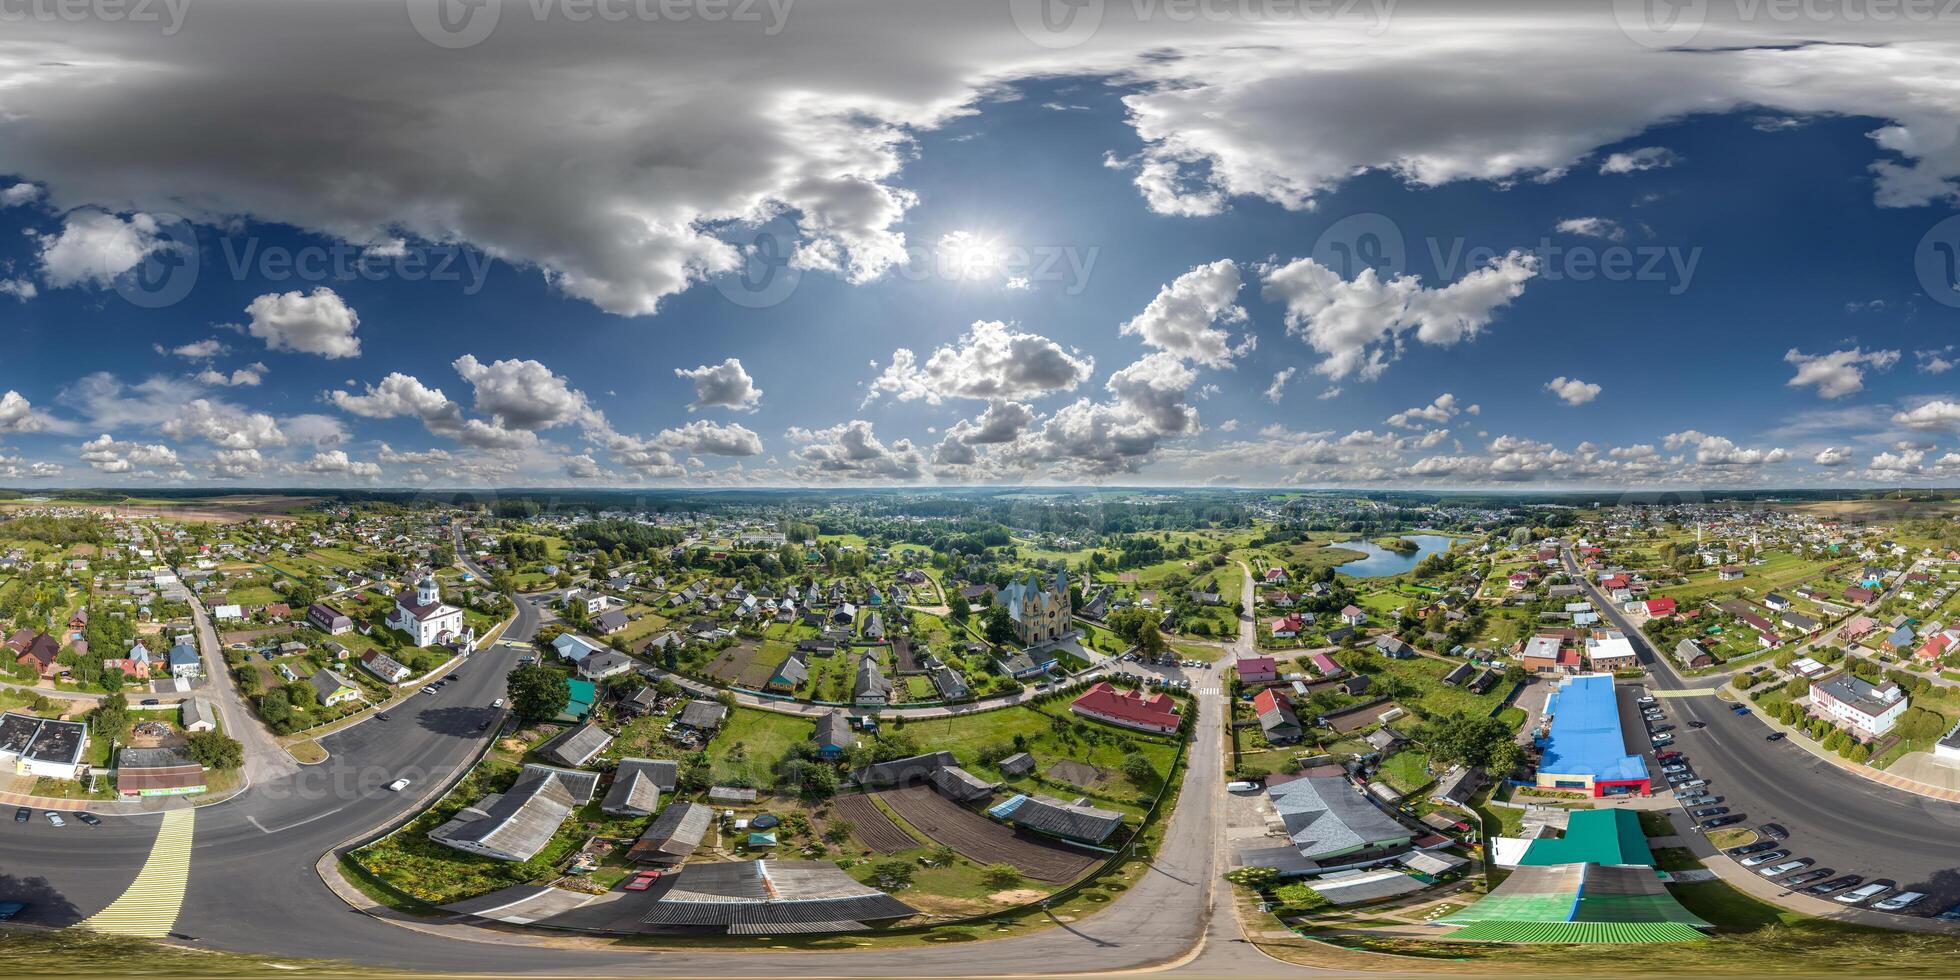 aerial hdri 360 panorama view from great height on buildings, churches and center market square of provincial city in equirectangular seamless spherical  projection. use as sky replacement for drone photo